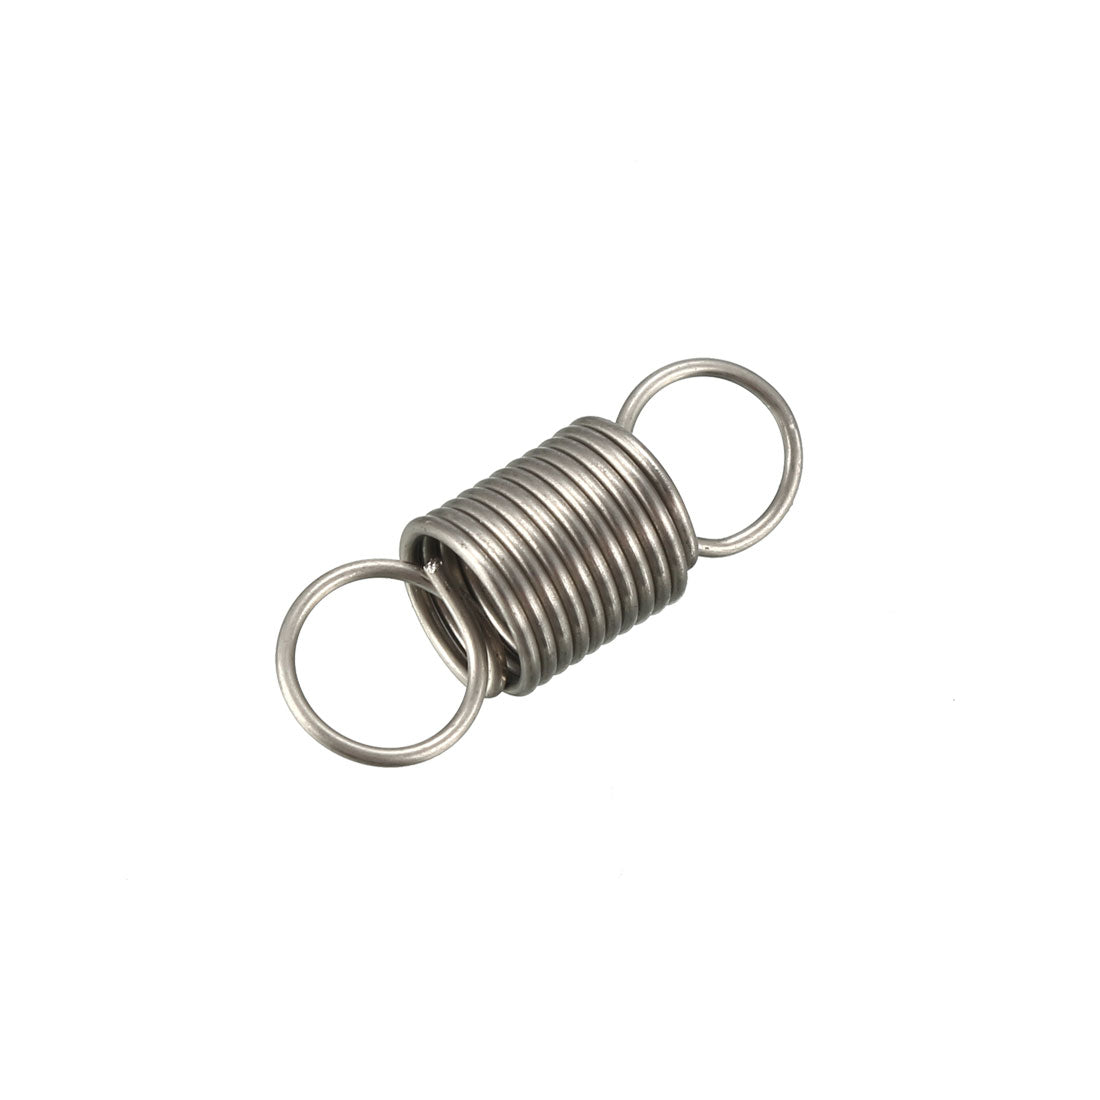 uxcell Uxcell Extended Tension Spring Wire Diameter 0.02", OD 0.2", Free Length 0.59" 15pcs